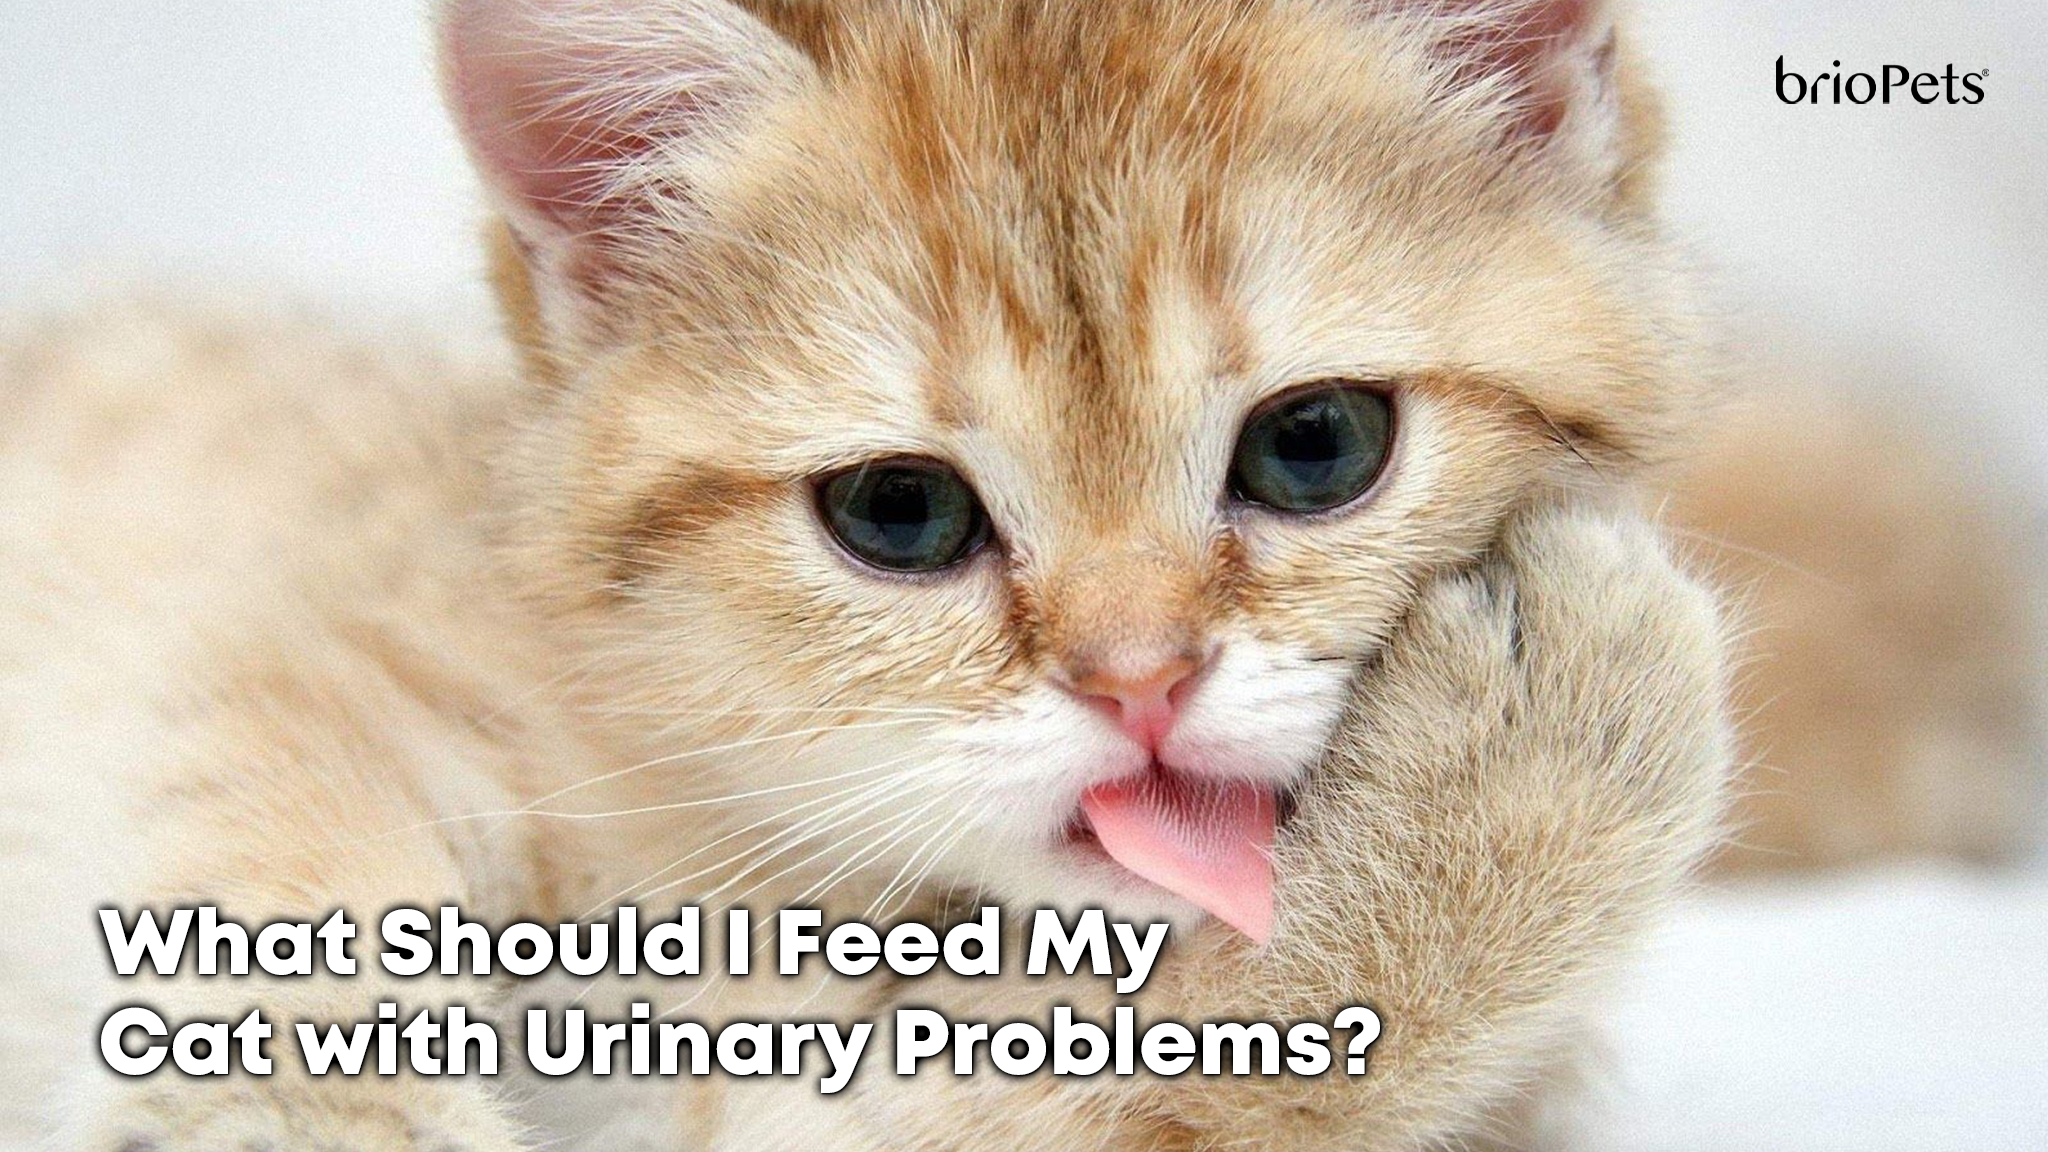 What Should I Feed My Cat with Urinary Problems?